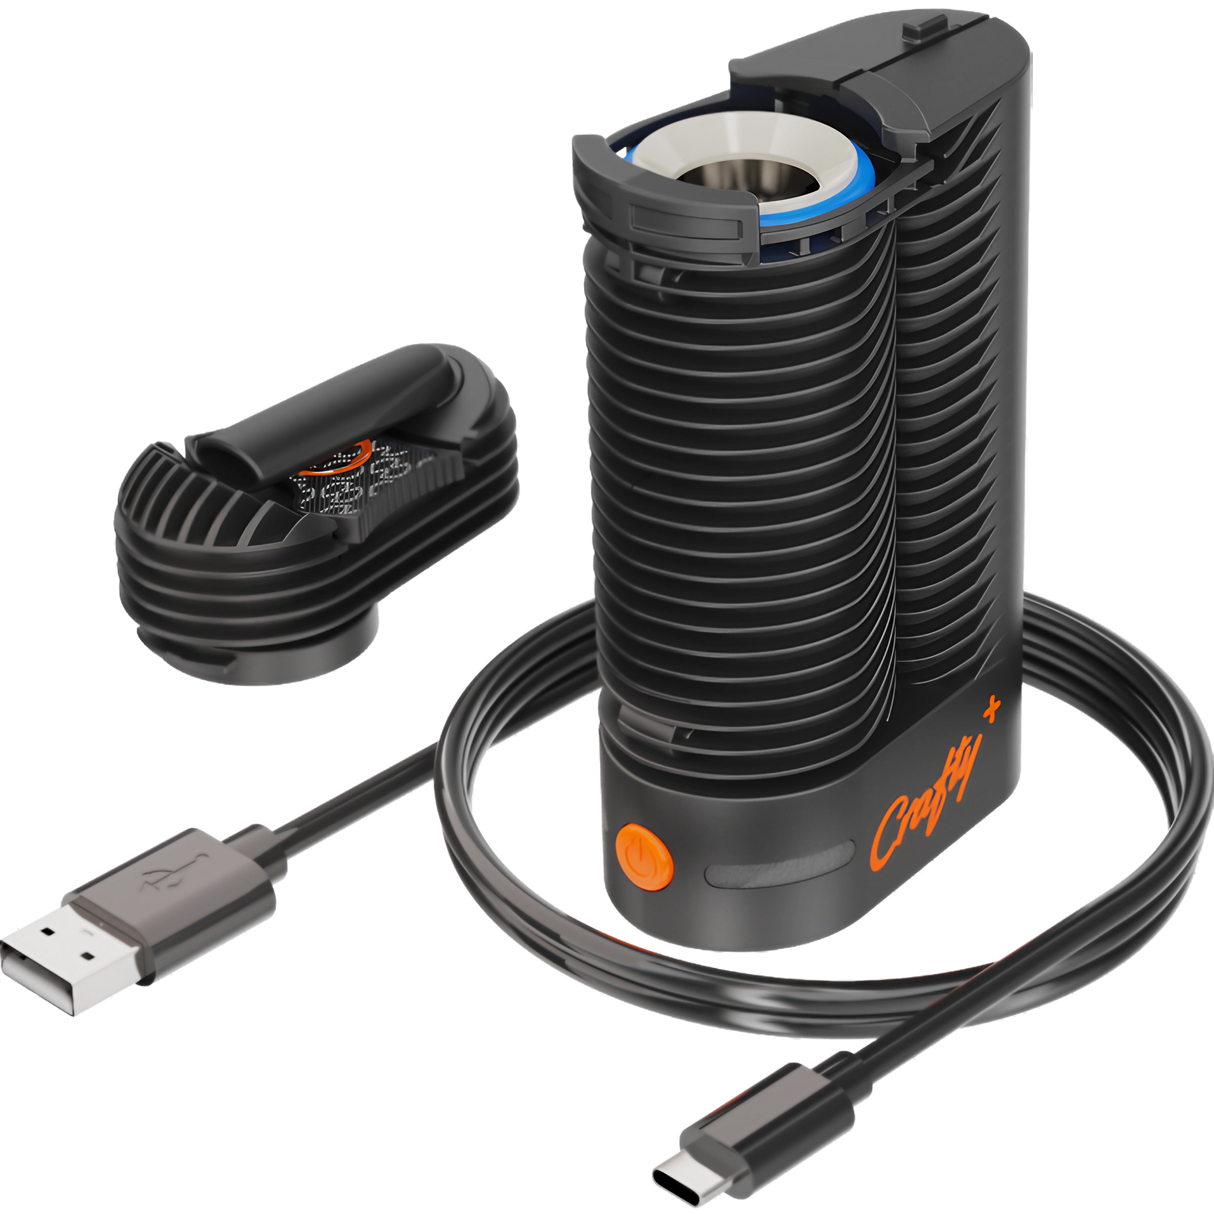 Storz & Bickel Crafty+ Portable Vaporizer for Dry Herbs with USB Cable